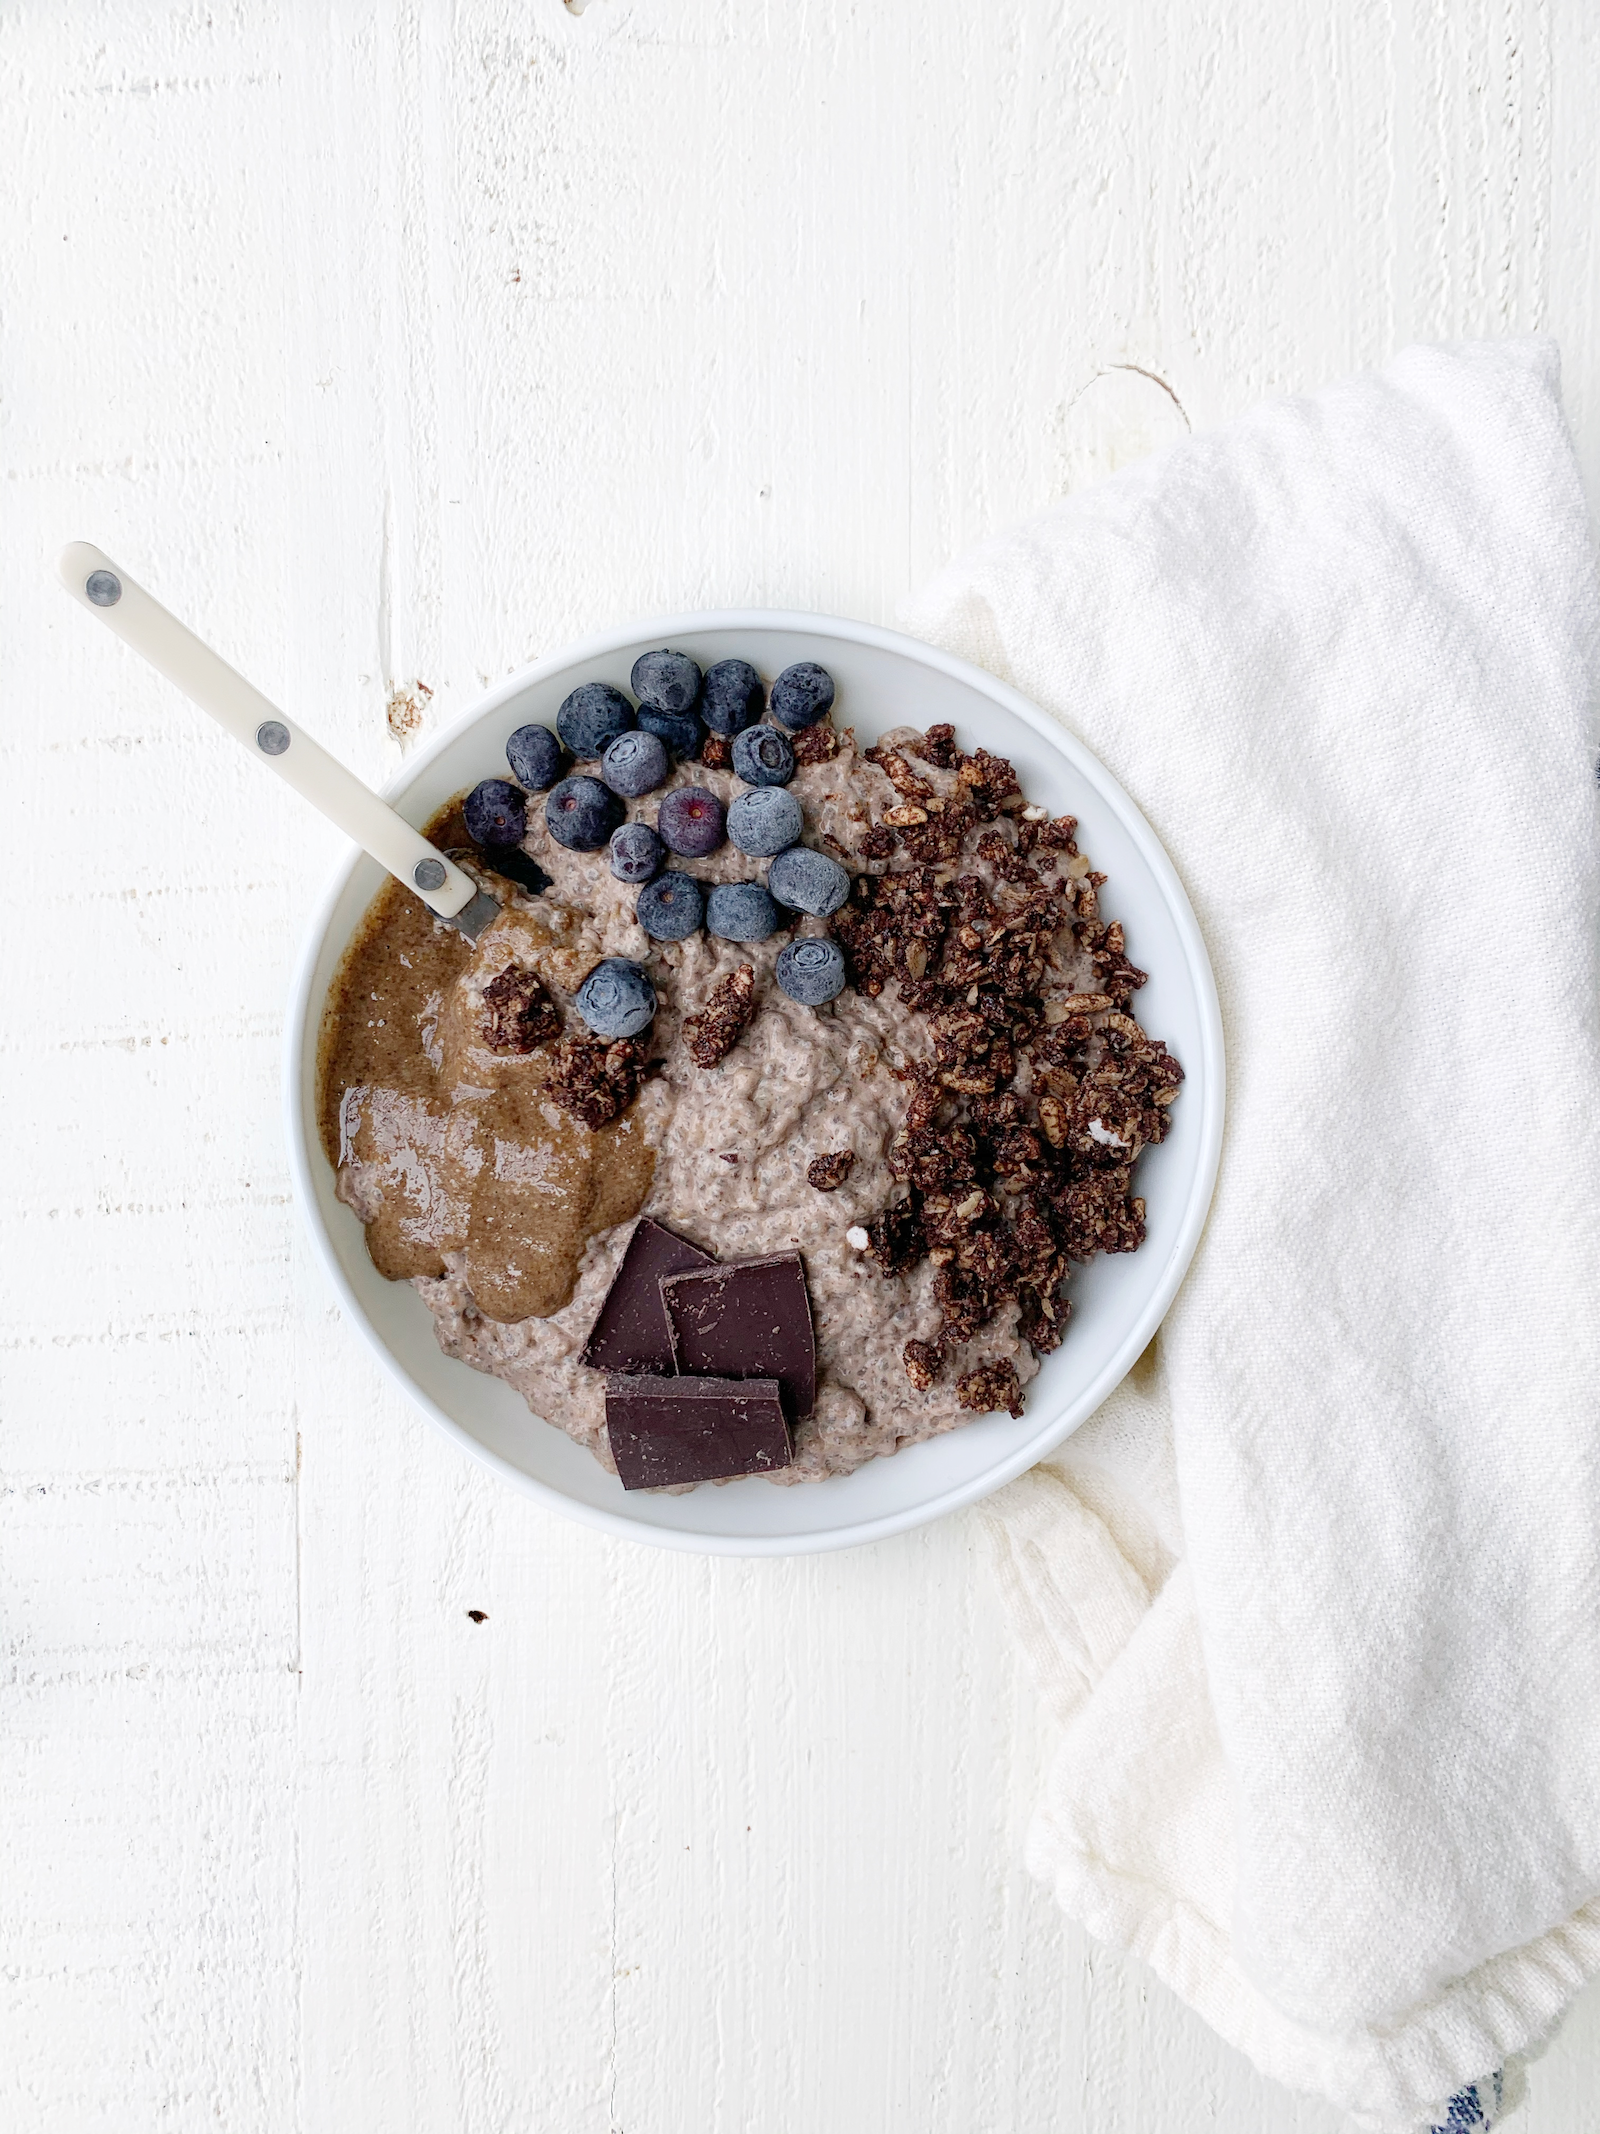 1 step Chocolate Almond Butter Chia Seed Pudding Recipe